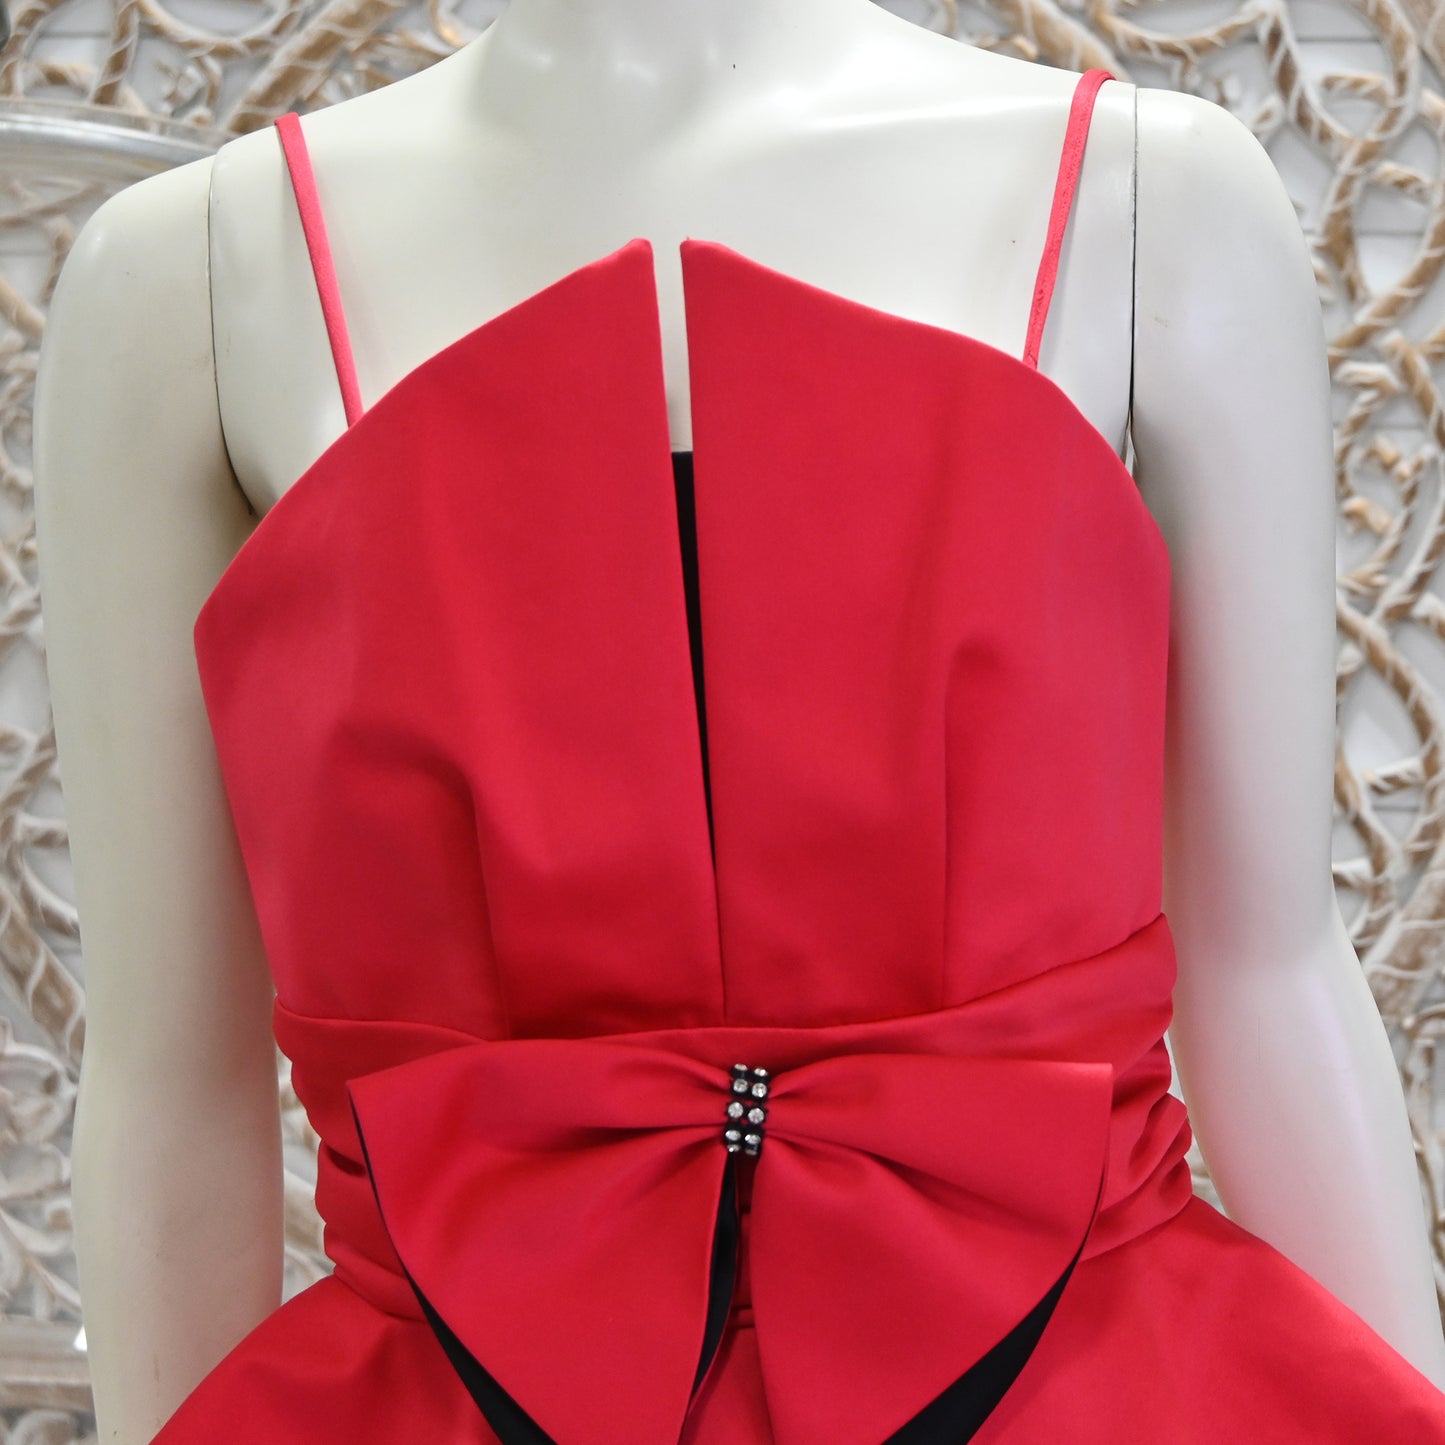 Vintage 80s Ravishing Red Structured Peplum Party Cocktail Dress S